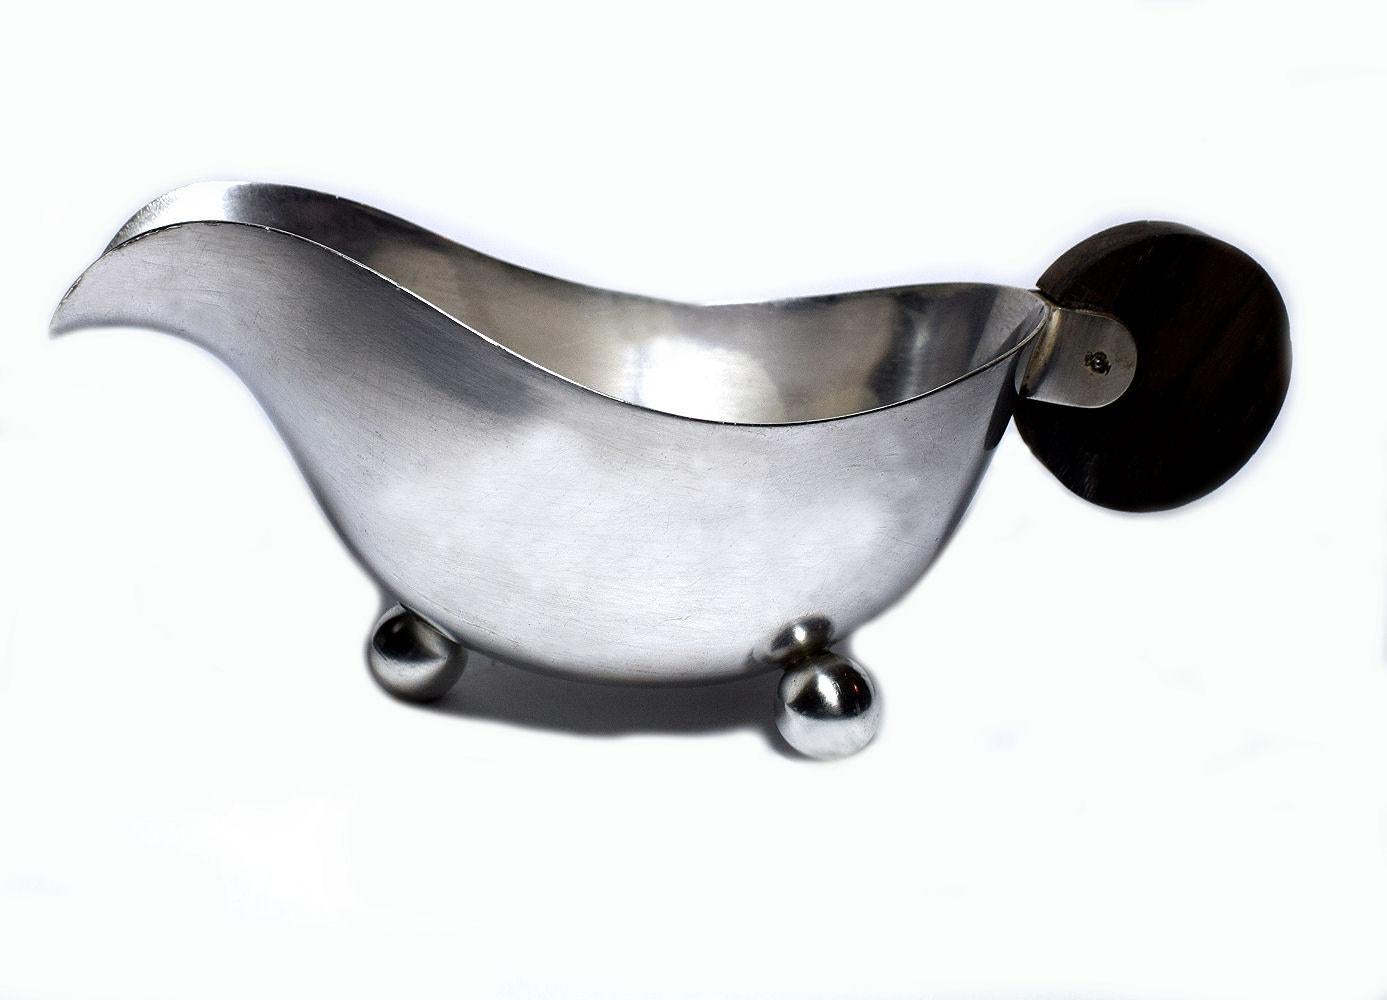 20th Century Art Deco Modernist Silver Plated Sauce Boat For Sale